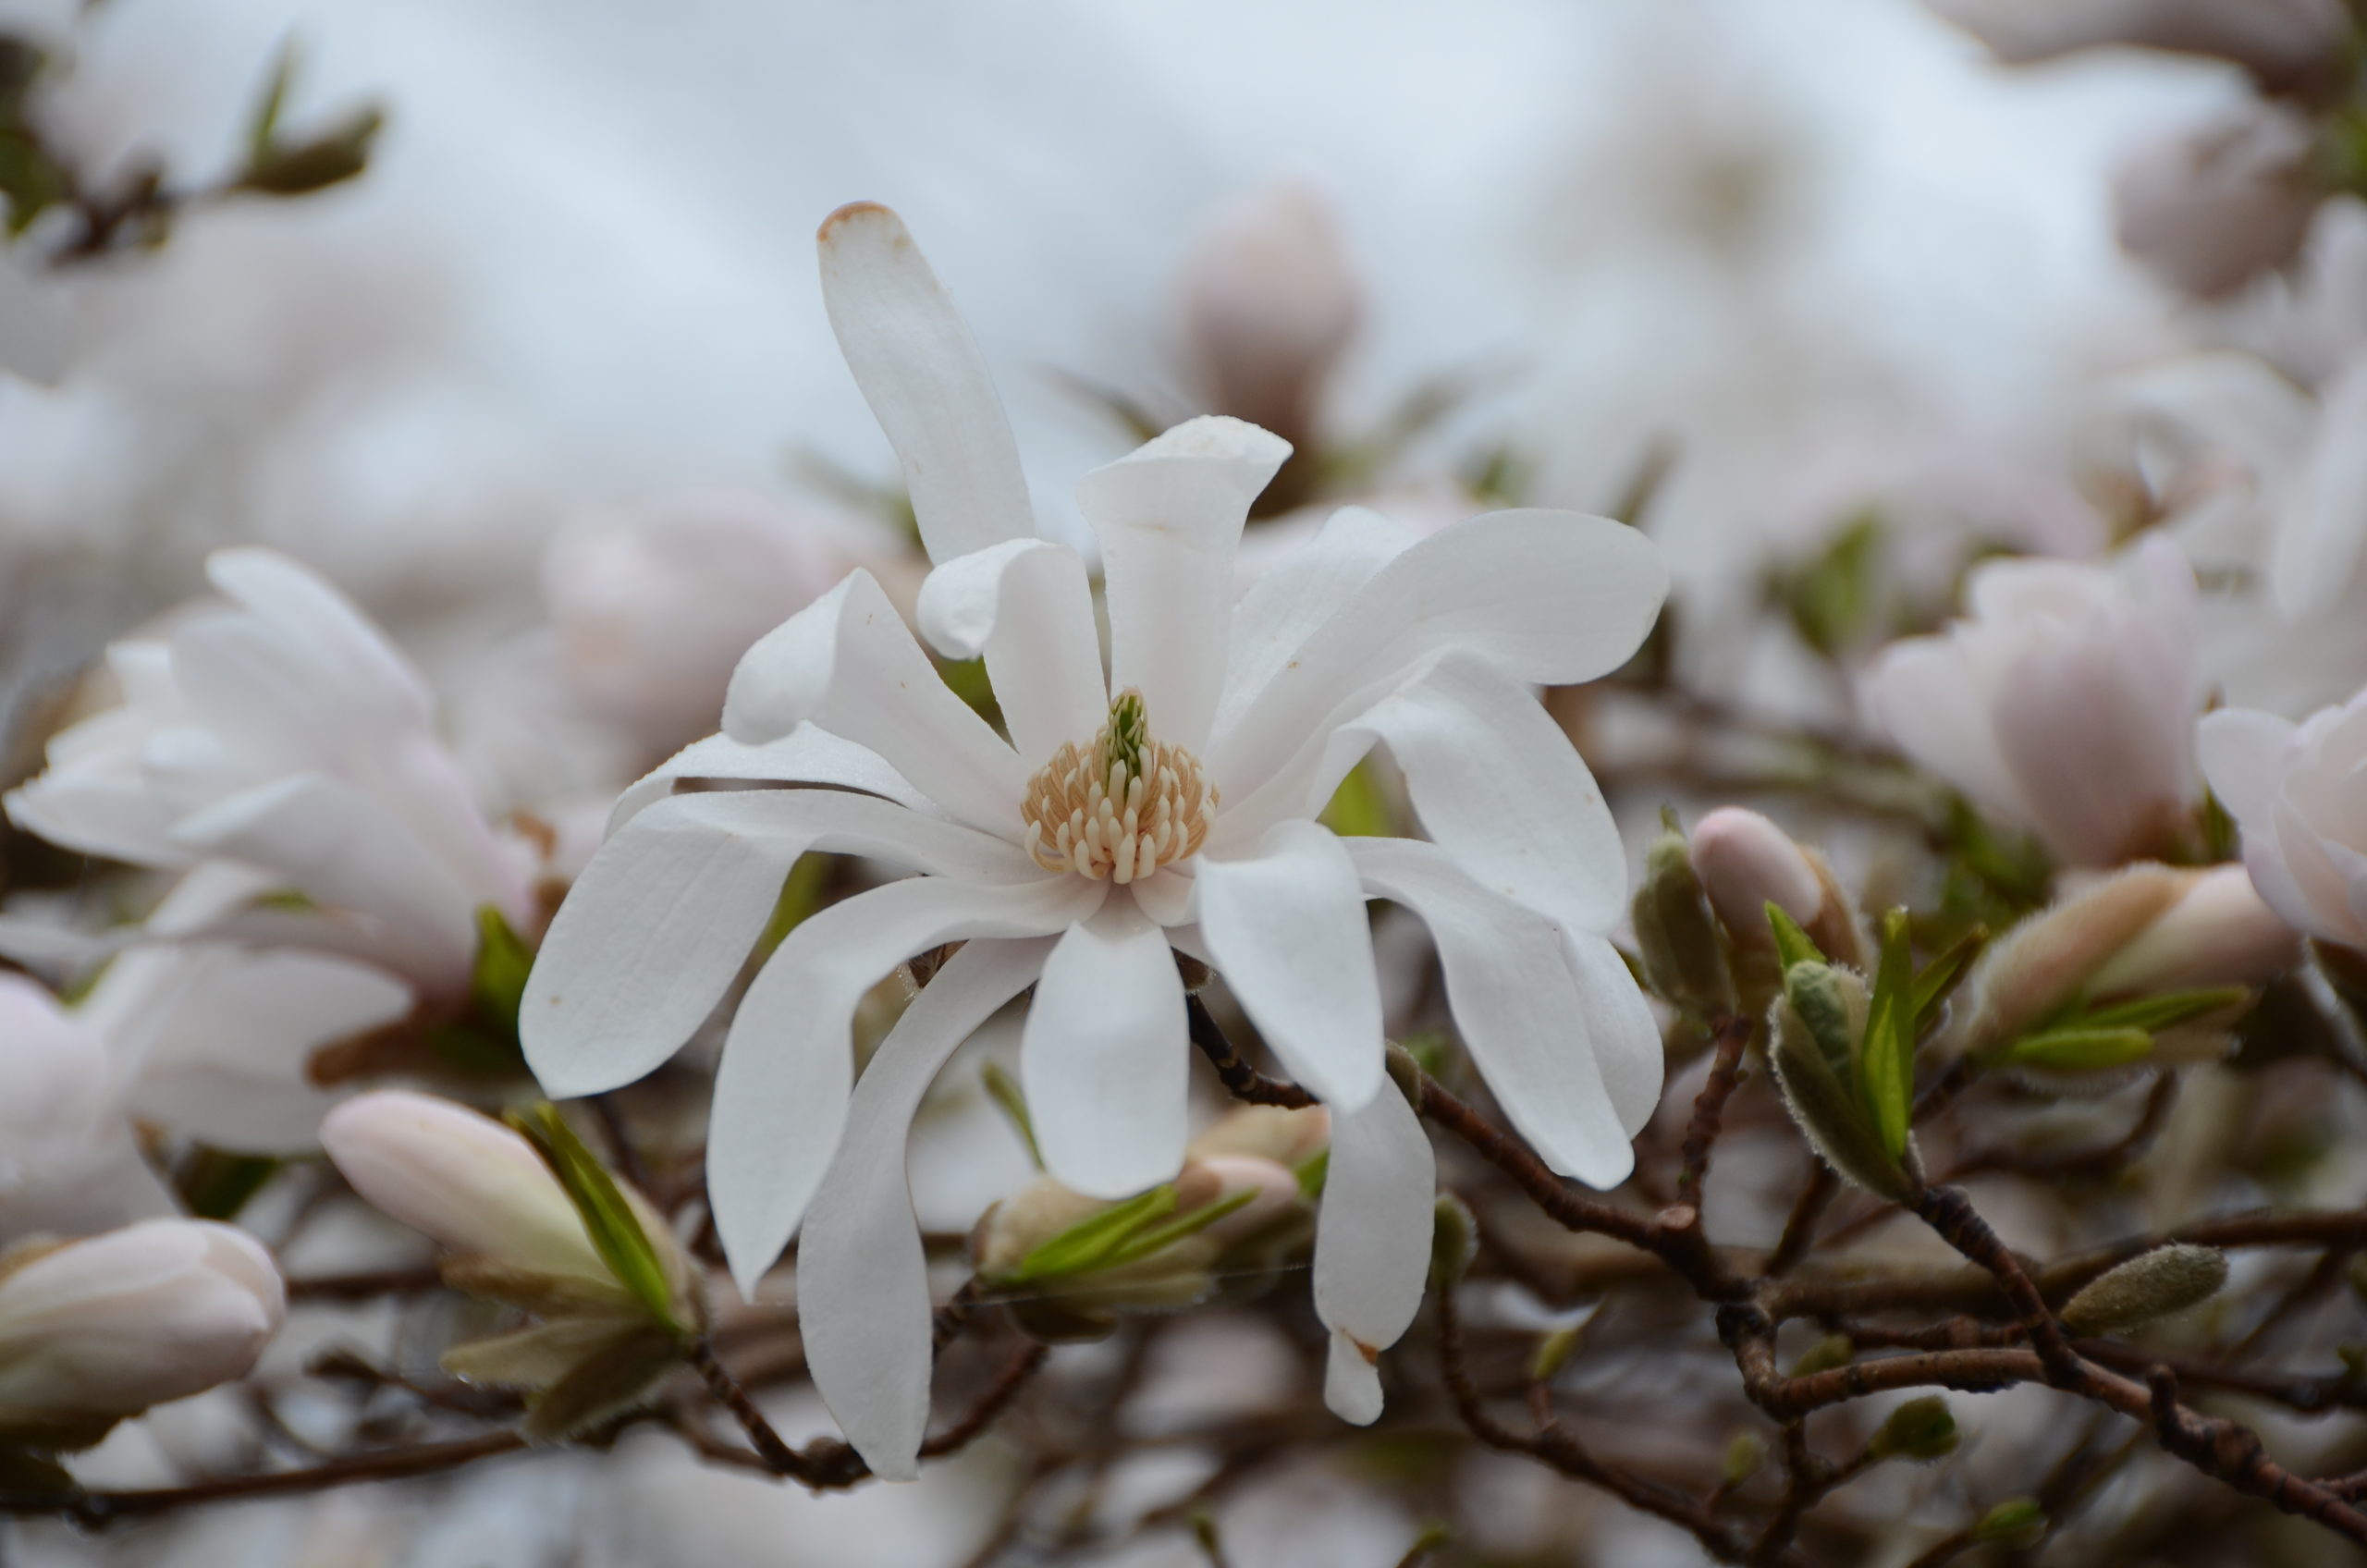 Star magnolia (Magnolia stellate) flowers are very different from standard magnolias. Star flowers are almost always white, somewhat smaller, with a mild but pleasant aroma.